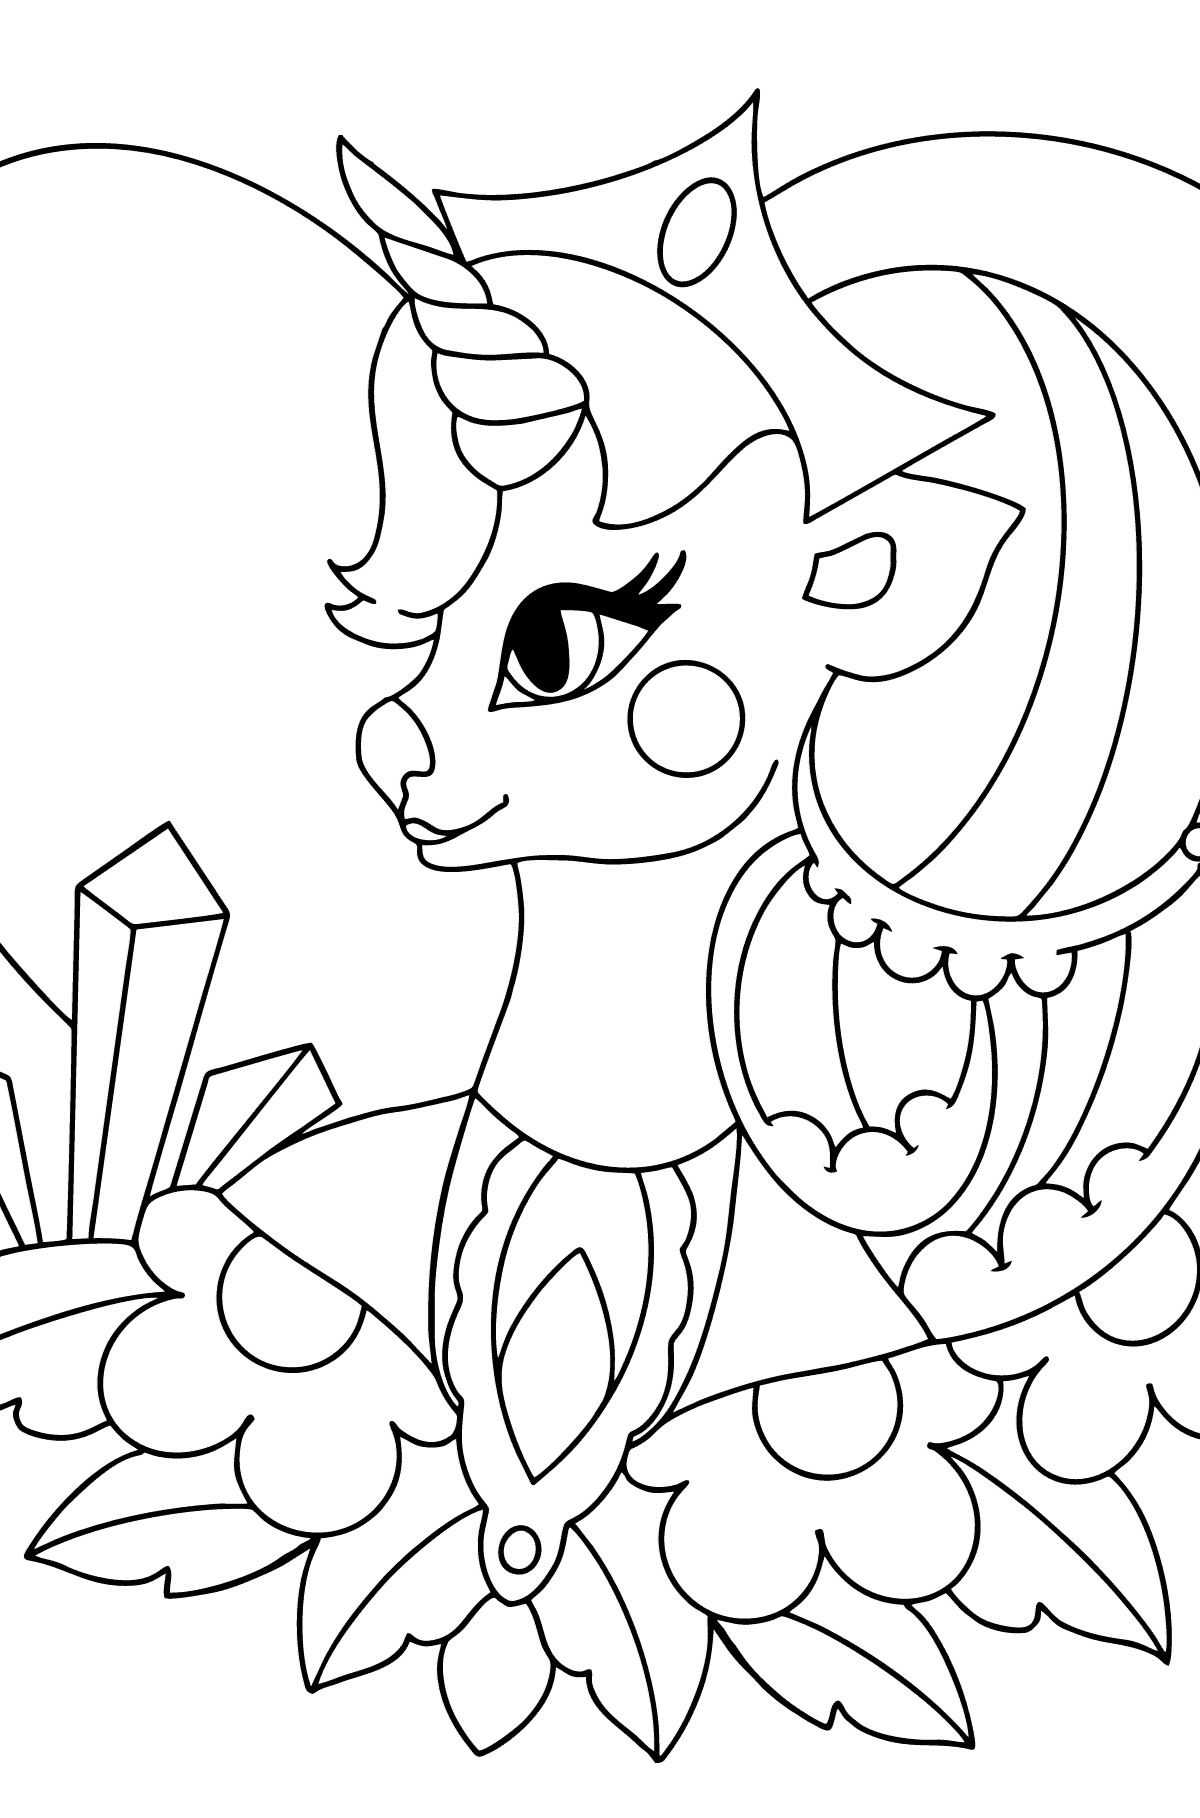 Cute Unicorn colouring page - Coloring Pages for Kids